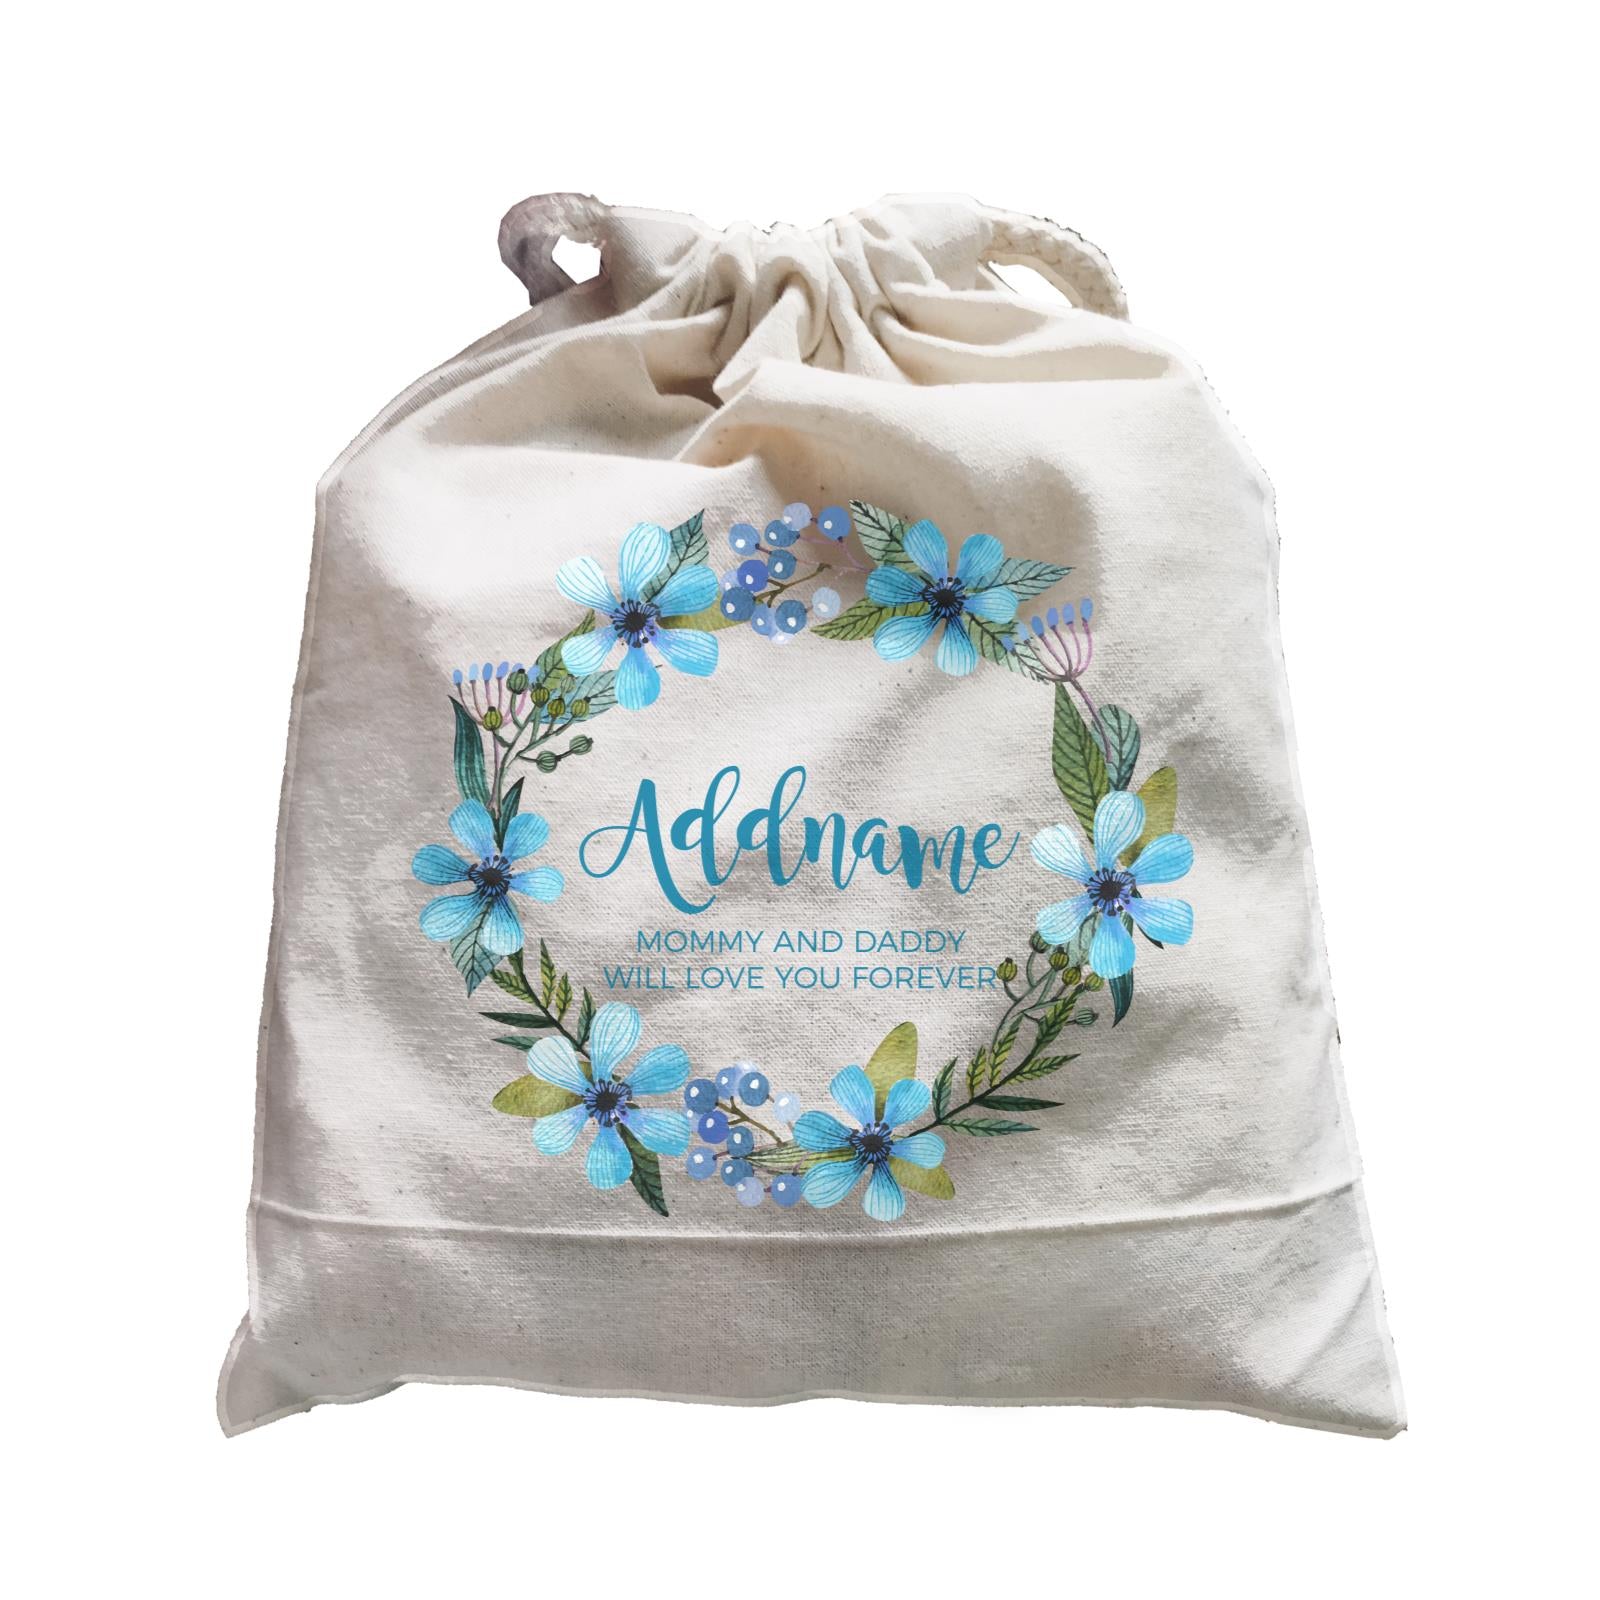 Turqoise Flower Wreath Personalizable with Name and Text Satchel